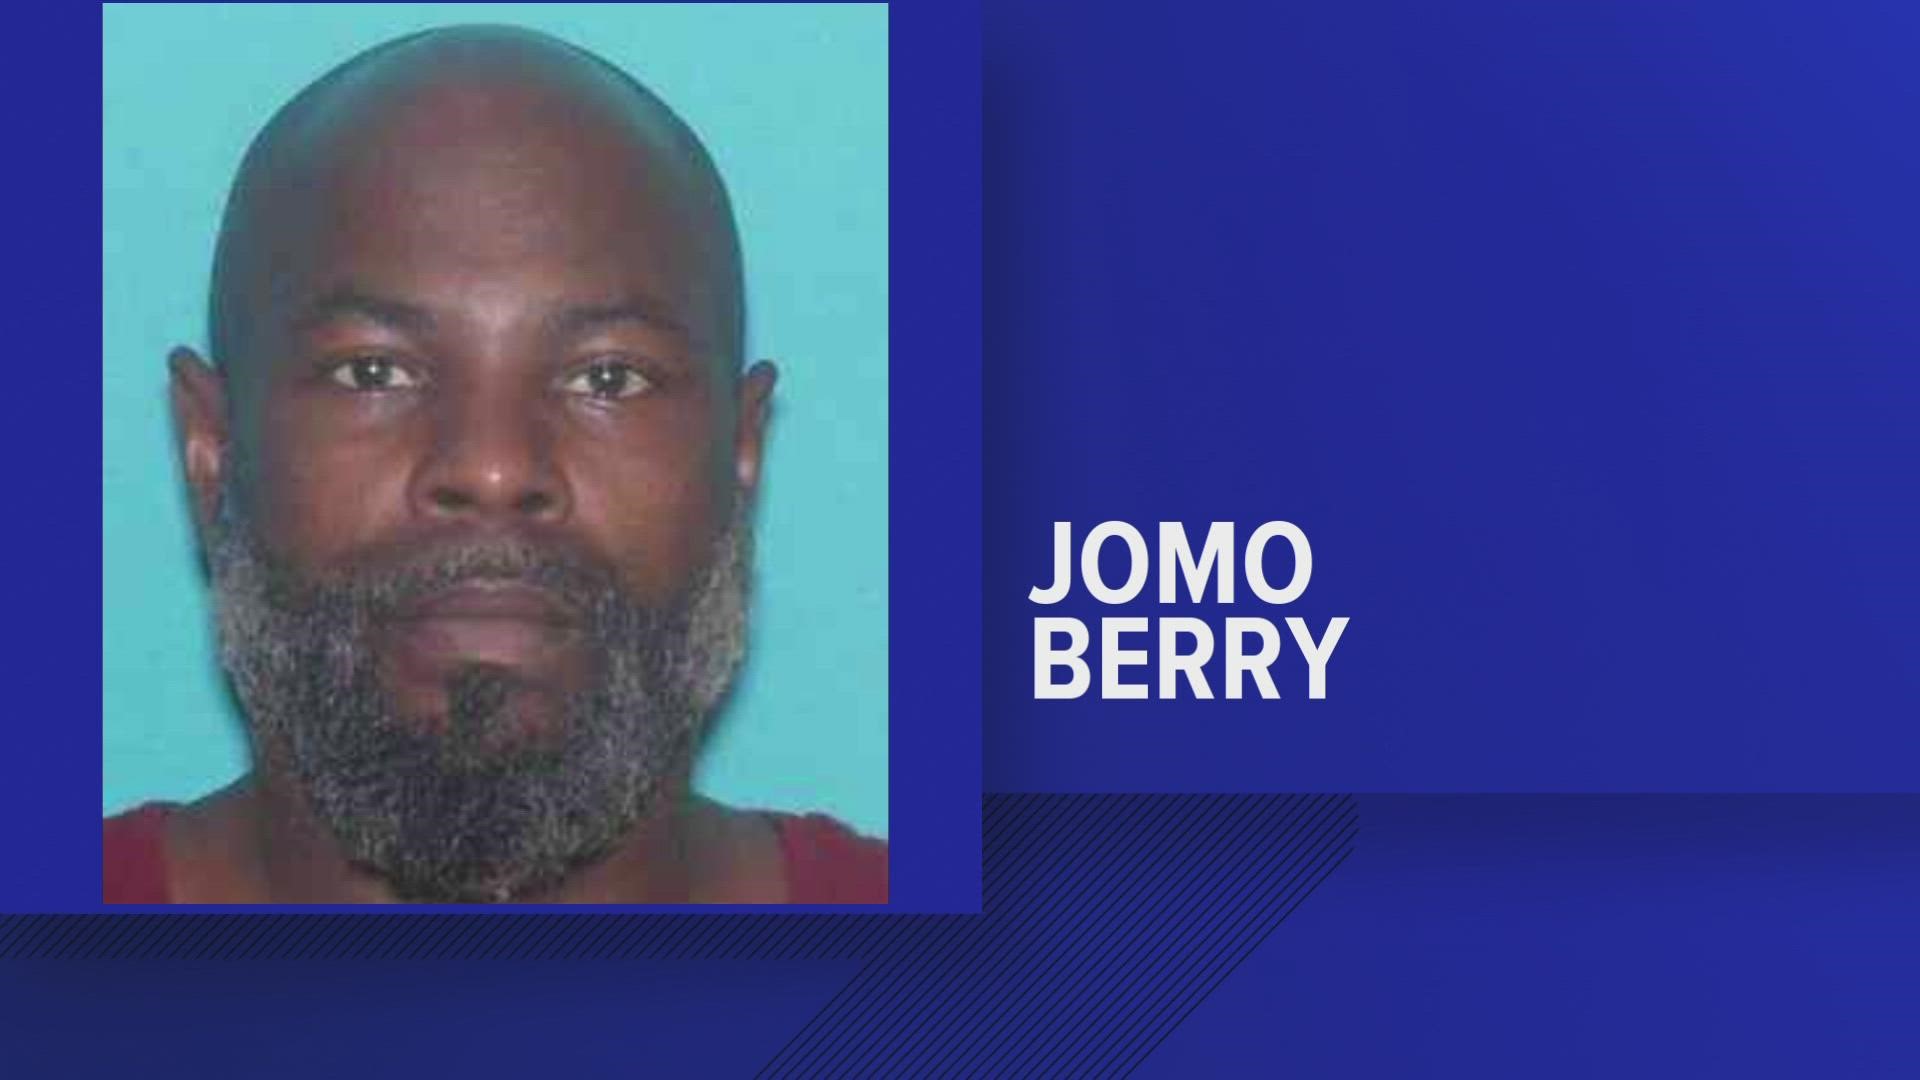 The Knoxville Police Department said Jomo Berry, 44, is facing charges after shooting at the same woman in two separate incidents.